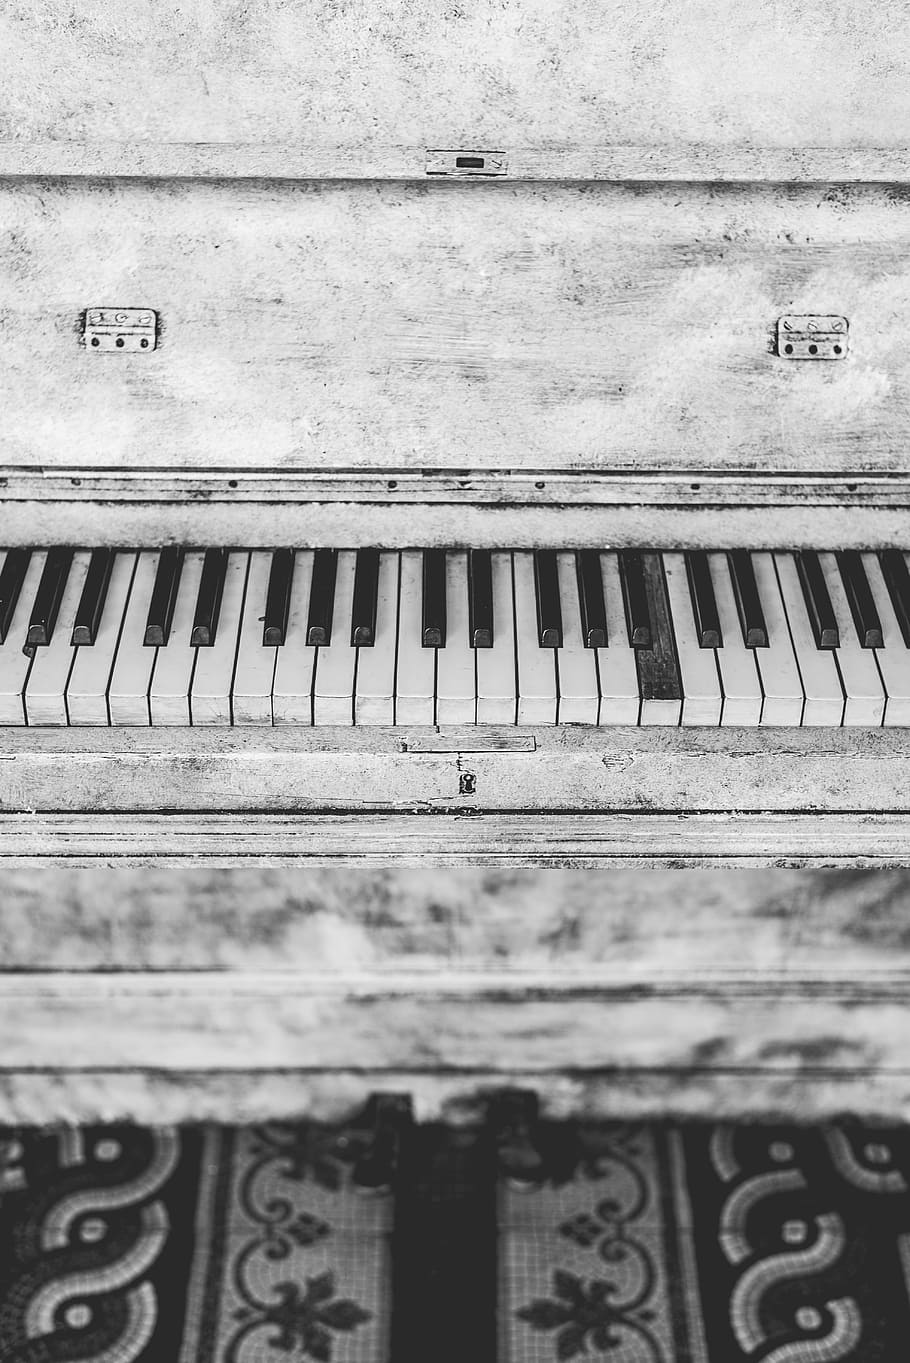 grayscale photo, upright, piano, instrument, music, keys, notes, old, vintage, wood